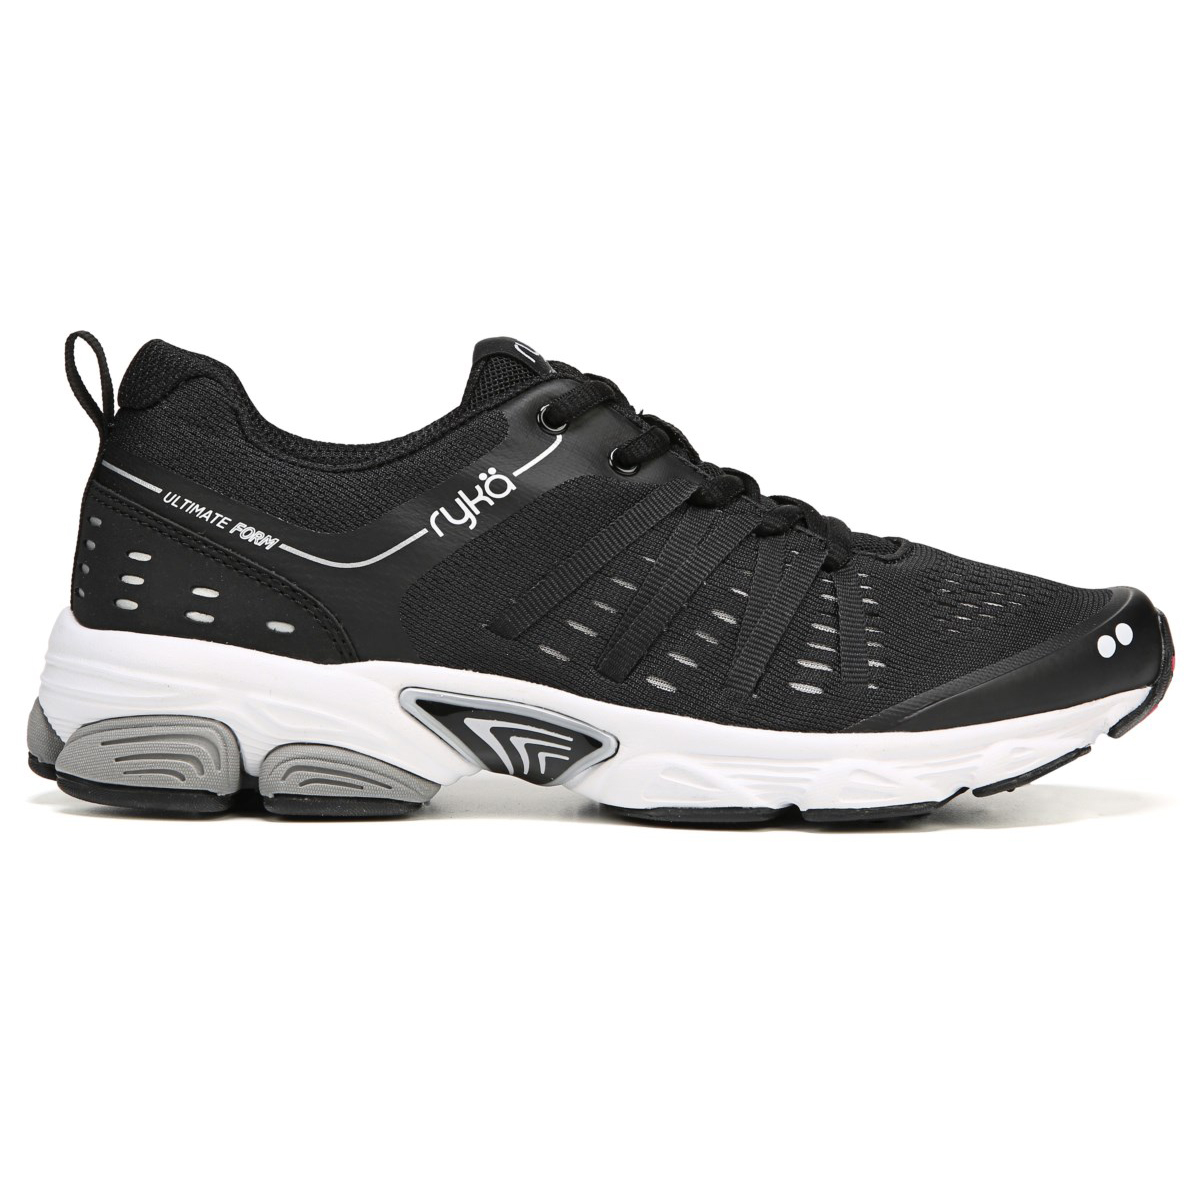 Ryka Women's Ultimate Form Running Shoes - Black, 6